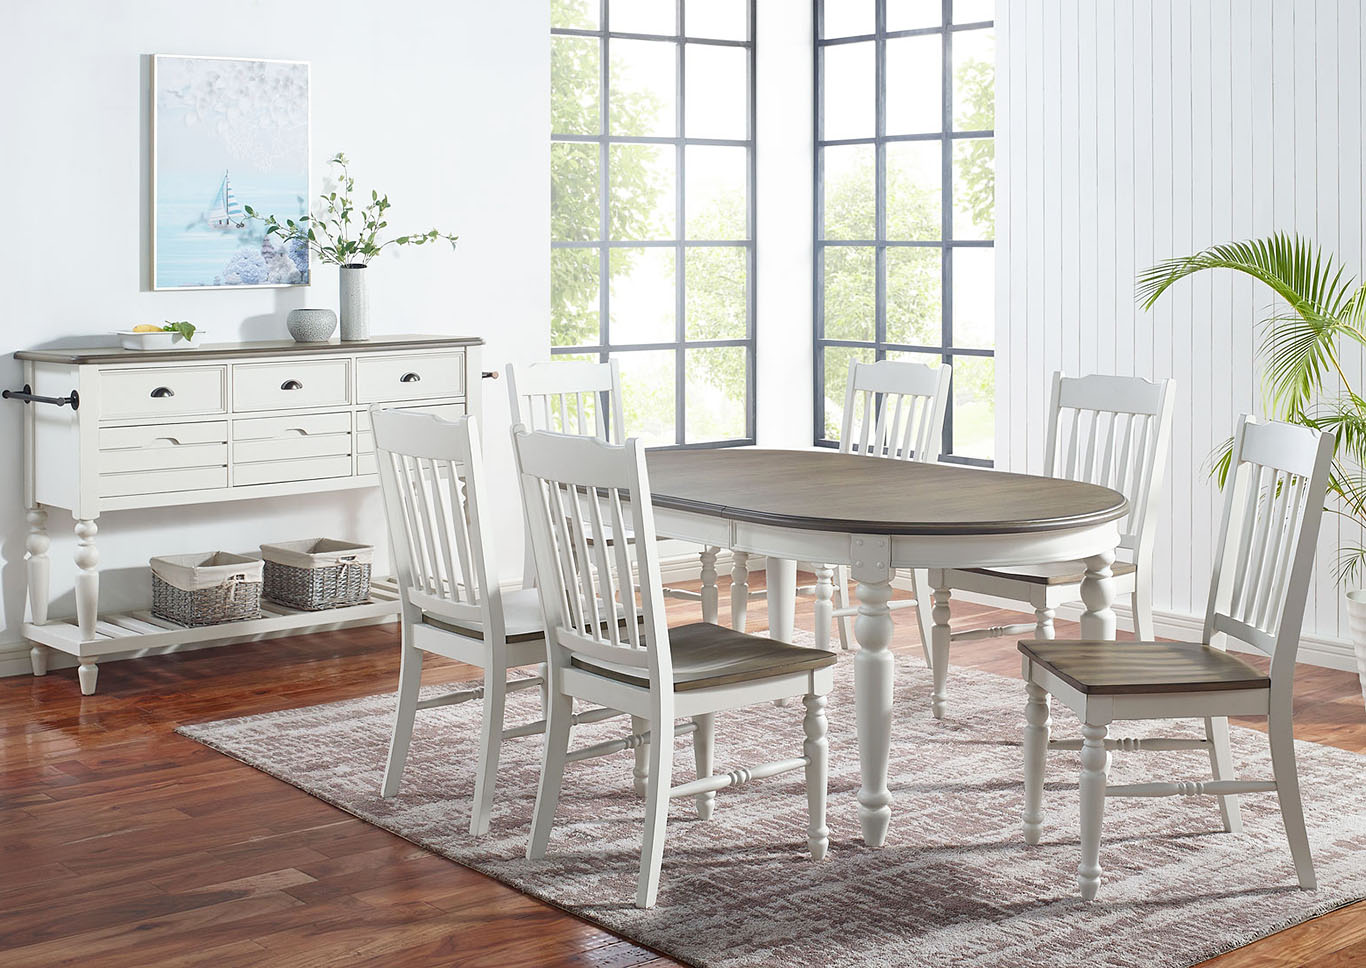 ivan smith dining room sets